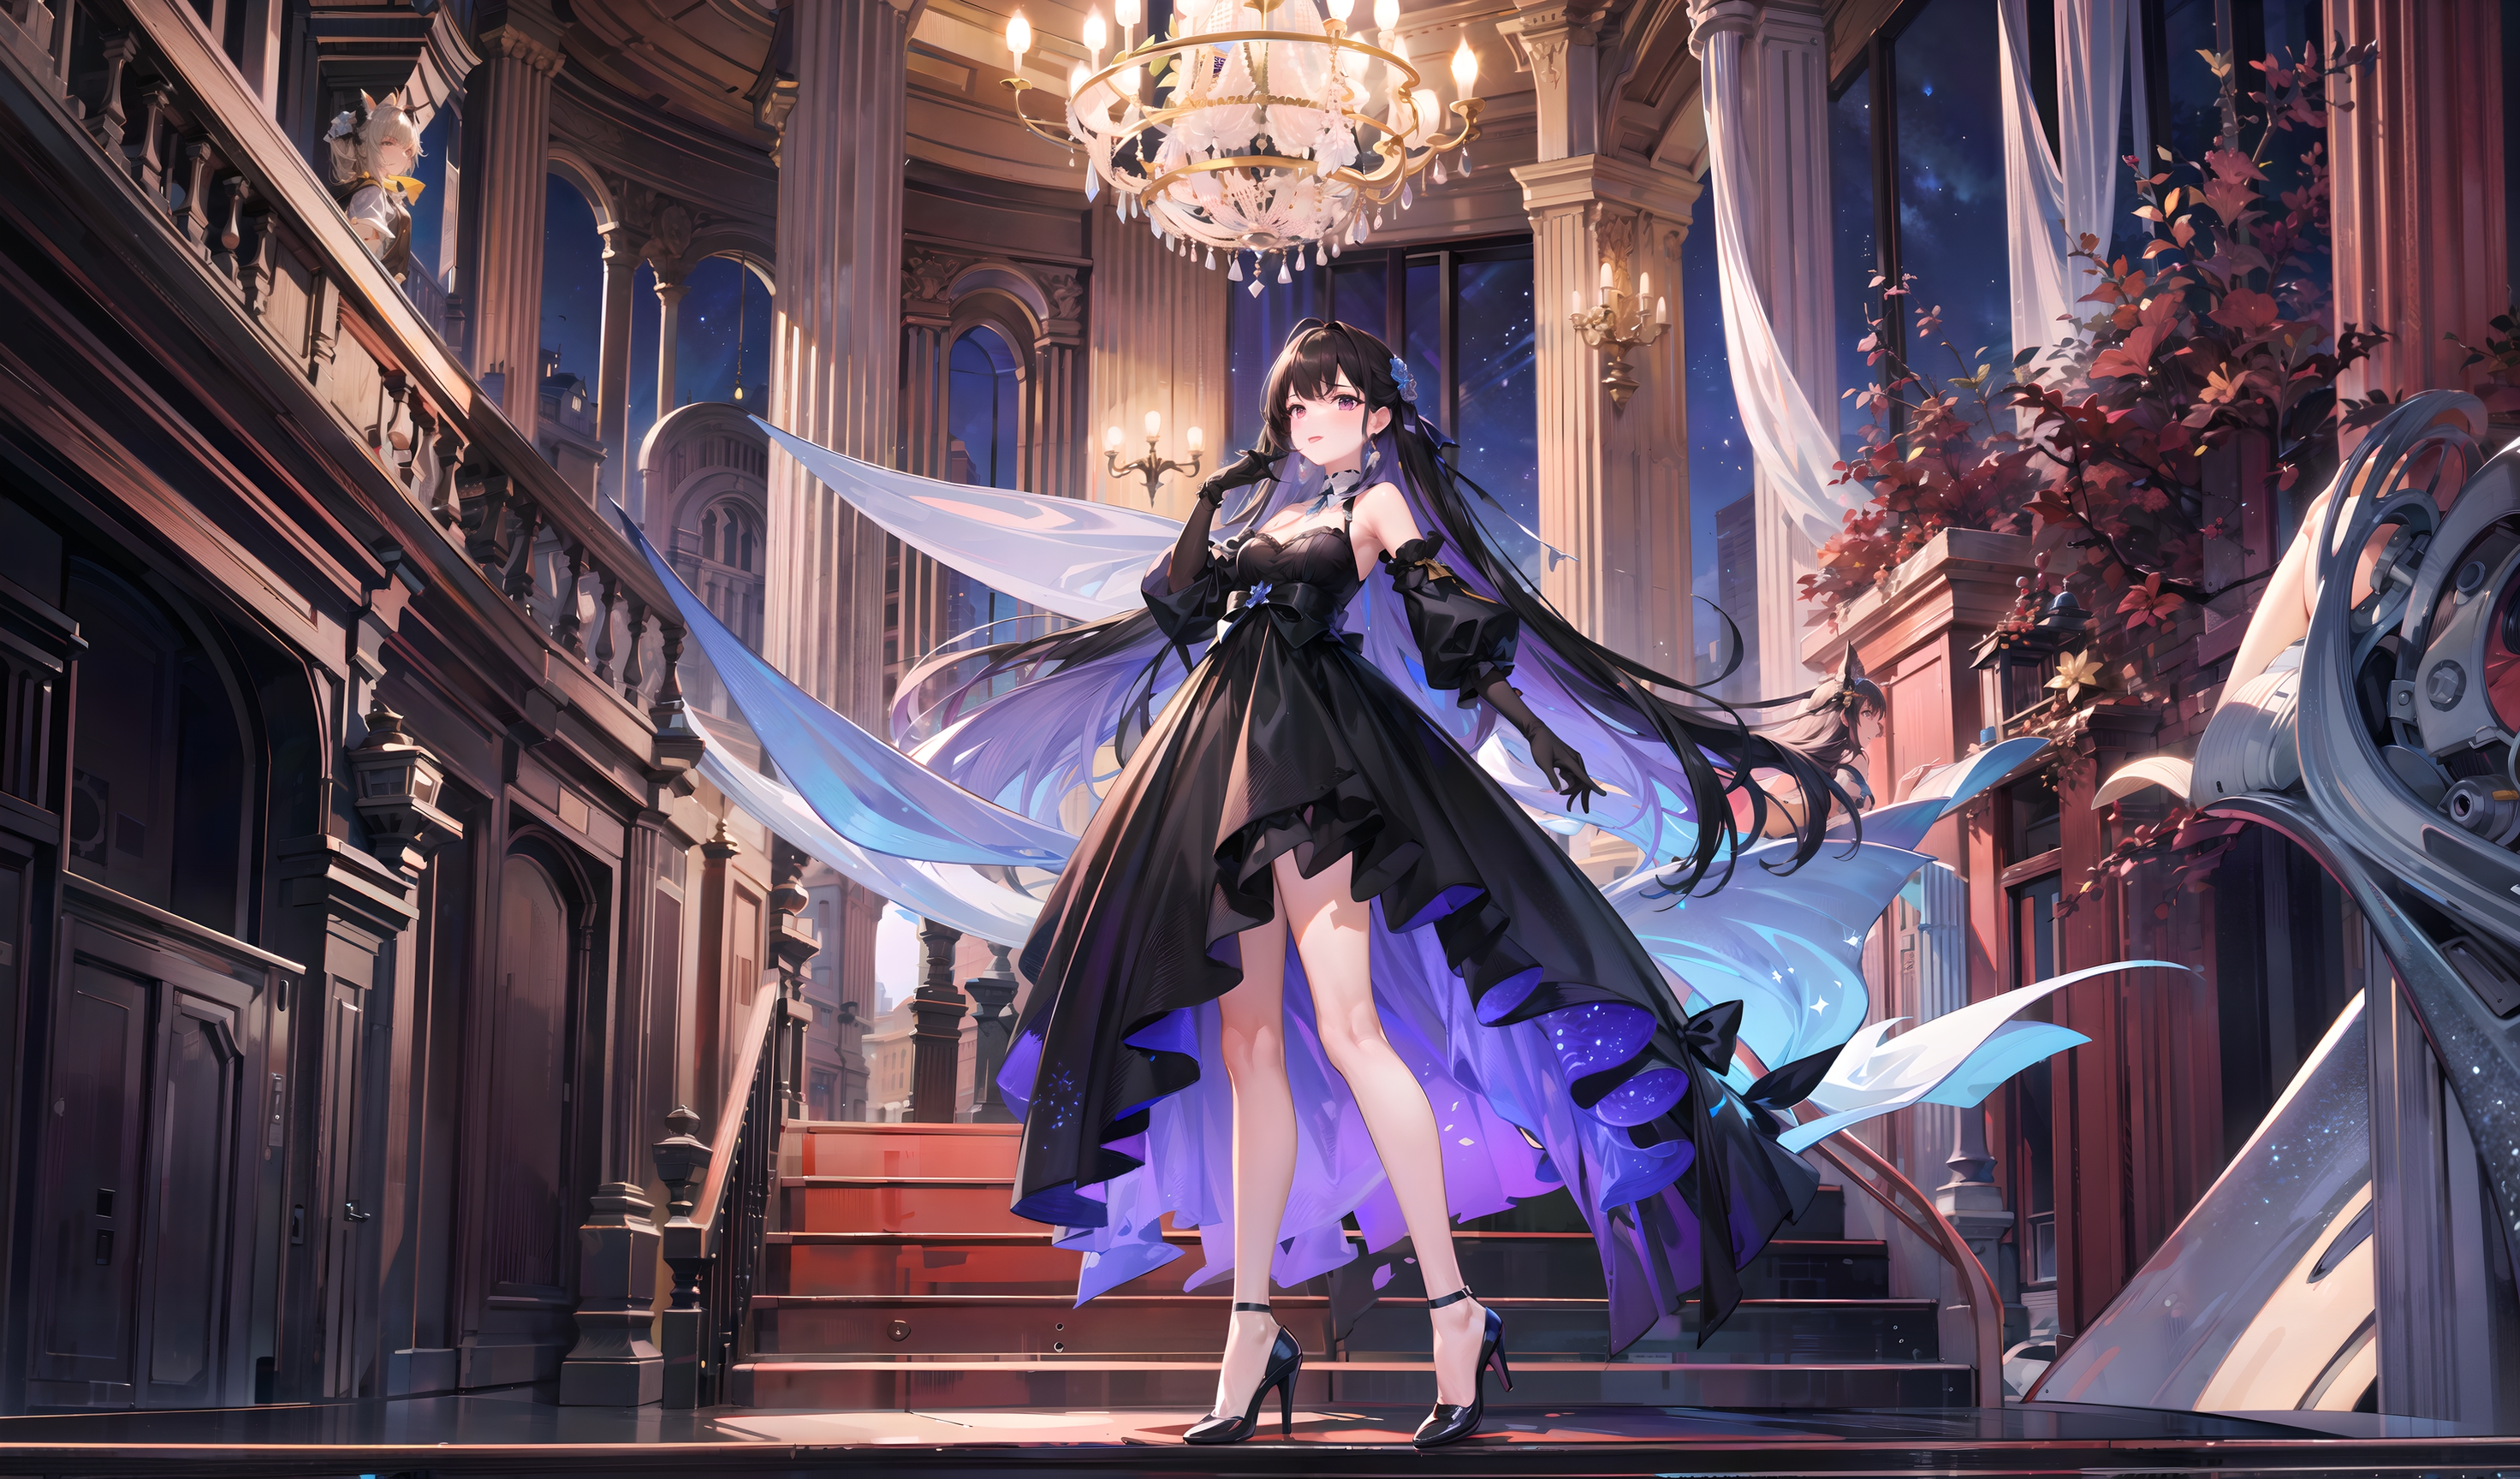 Anime 2944x1728 anime anime girls AI art looking at viewer indoors women indoors stairs chandeliers heels long hair candles flower in hair standing night frills window sky stars leaves digital art frill dress bare shoulders pointed toes pillar